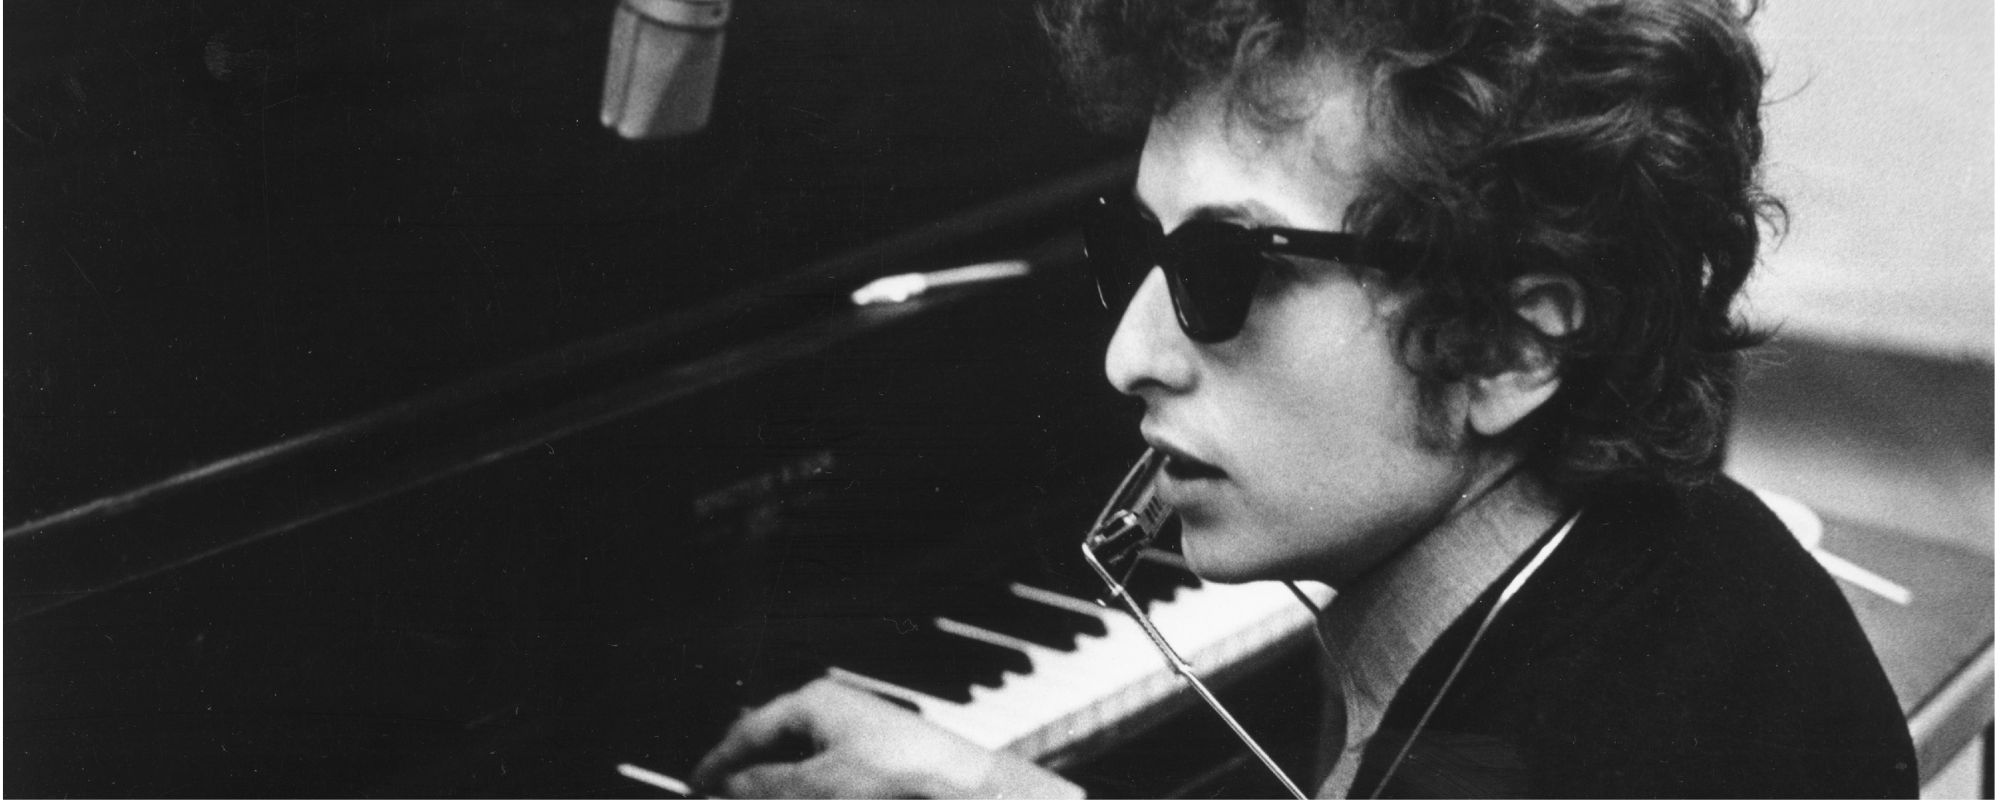 10 Songwriting Tips from Bob Dylan